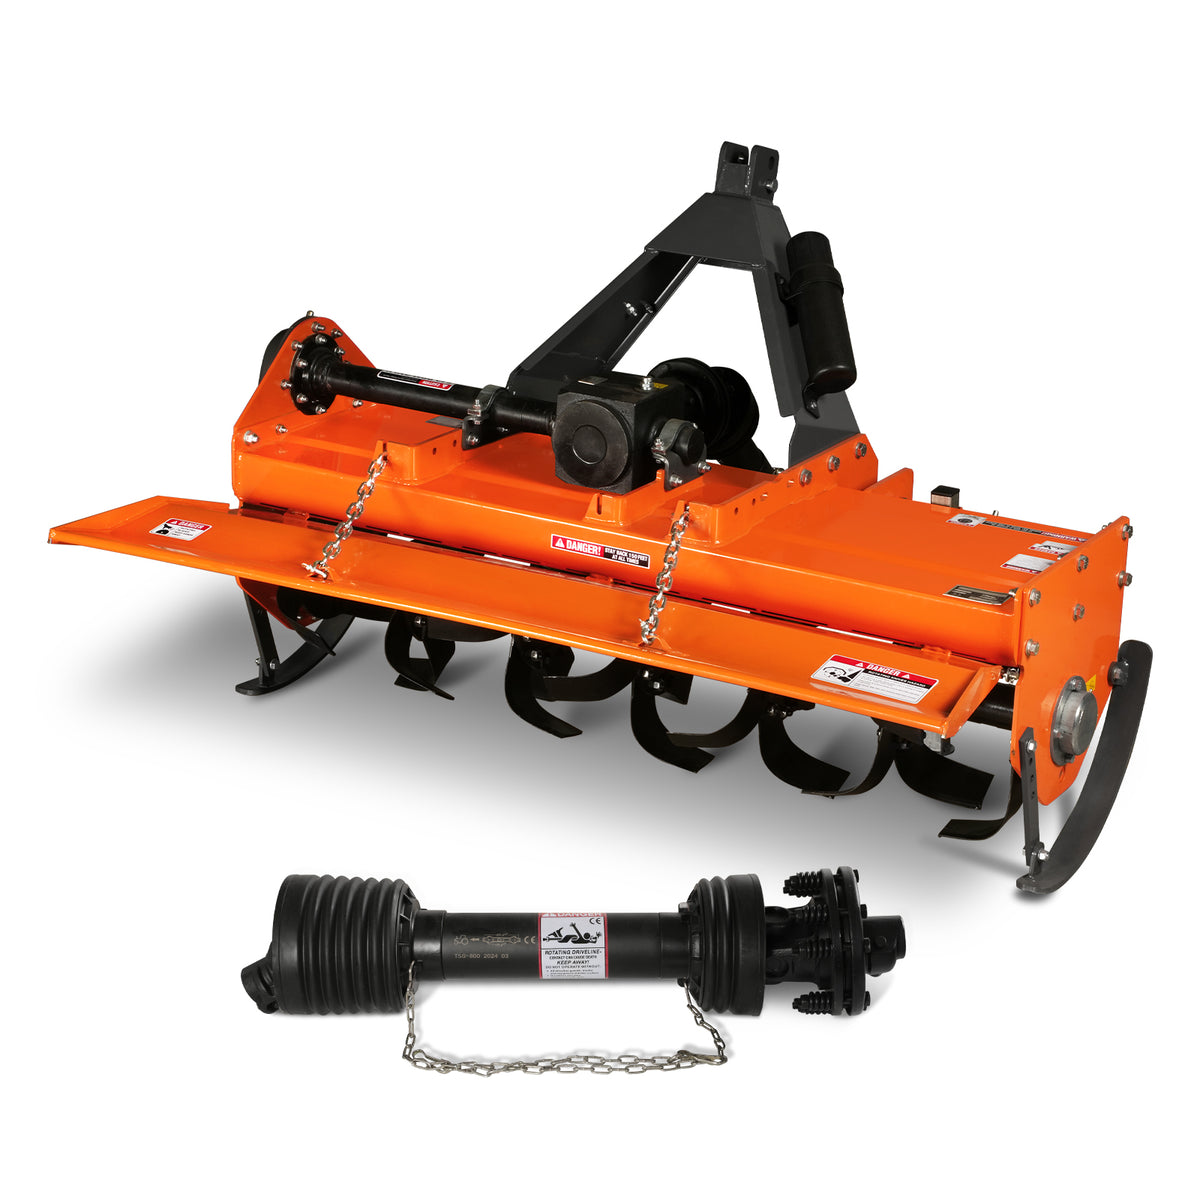 5FT 3-Point Gear Drive Rotary Tiller, 25-45HP Tractor, PTO Shaft Included (with Slip Clutch), Cat. 1 &2 Hookup